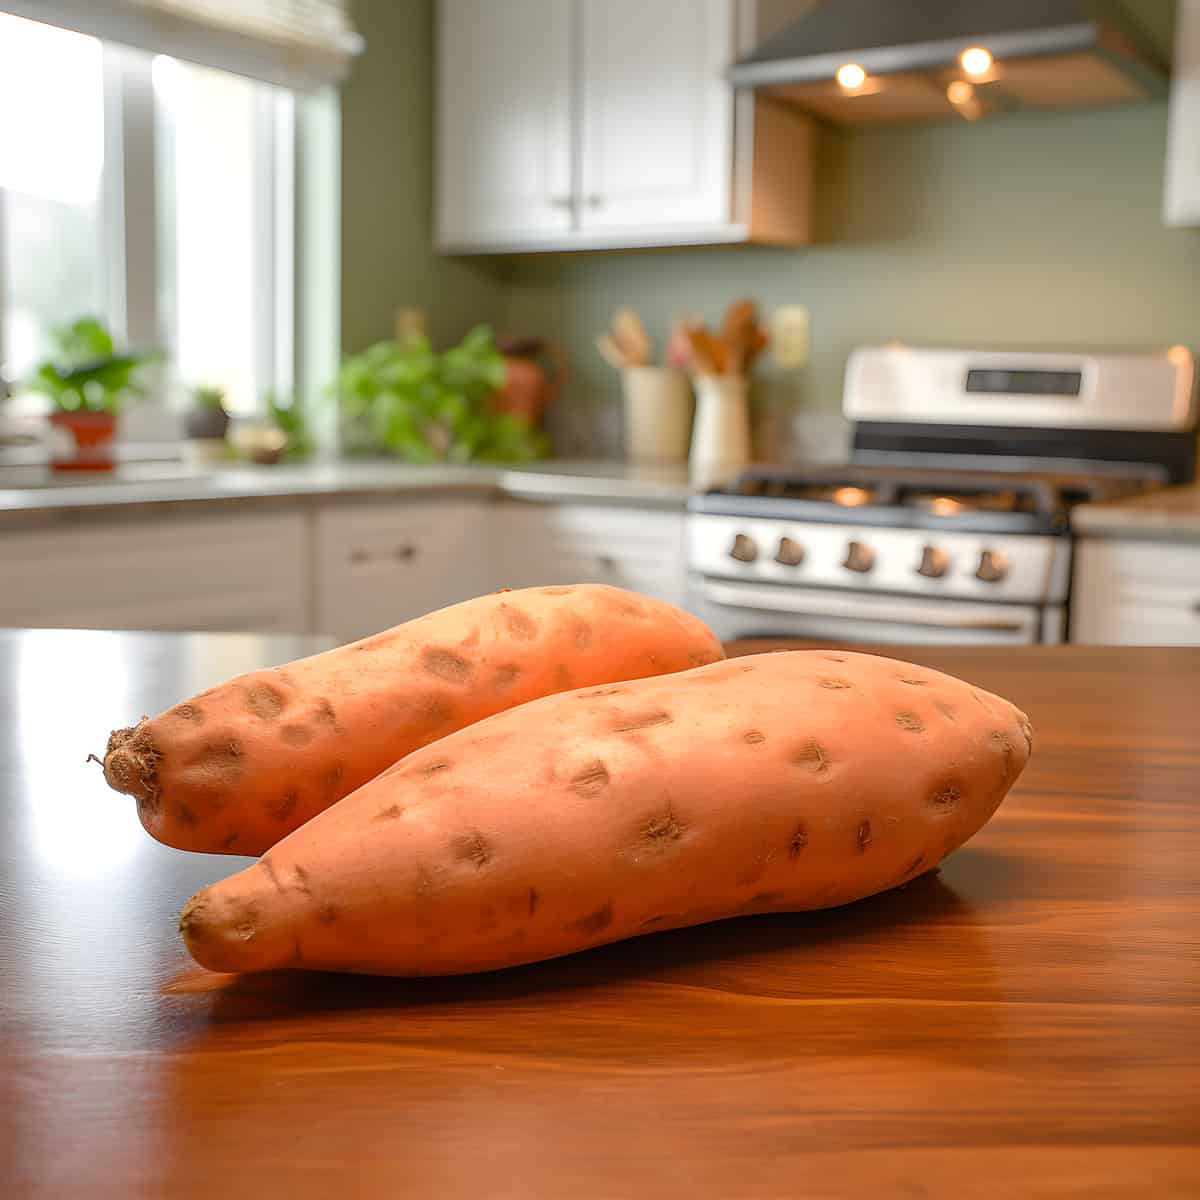 Darby Sweet Potatoes on a kitchen counter